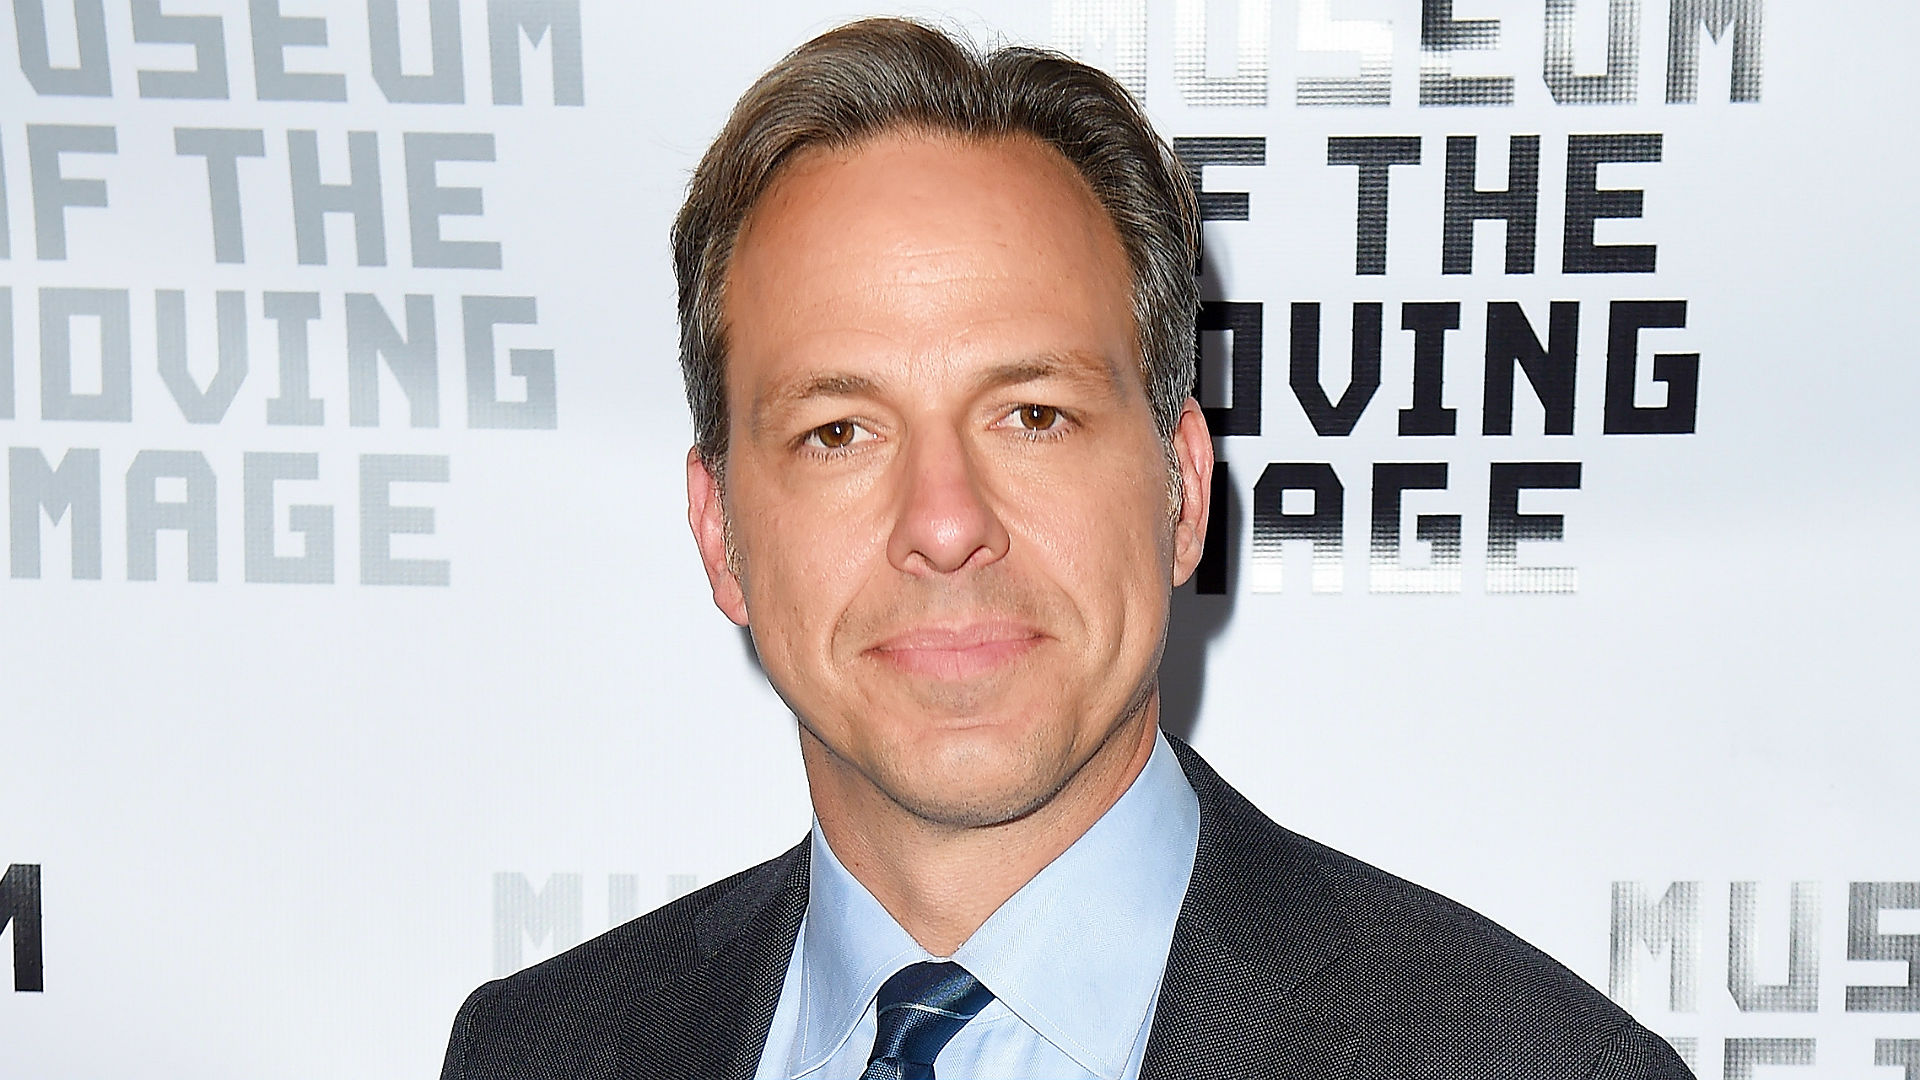 CNN's Jake Tapper: 'The Patriots are cheaters'